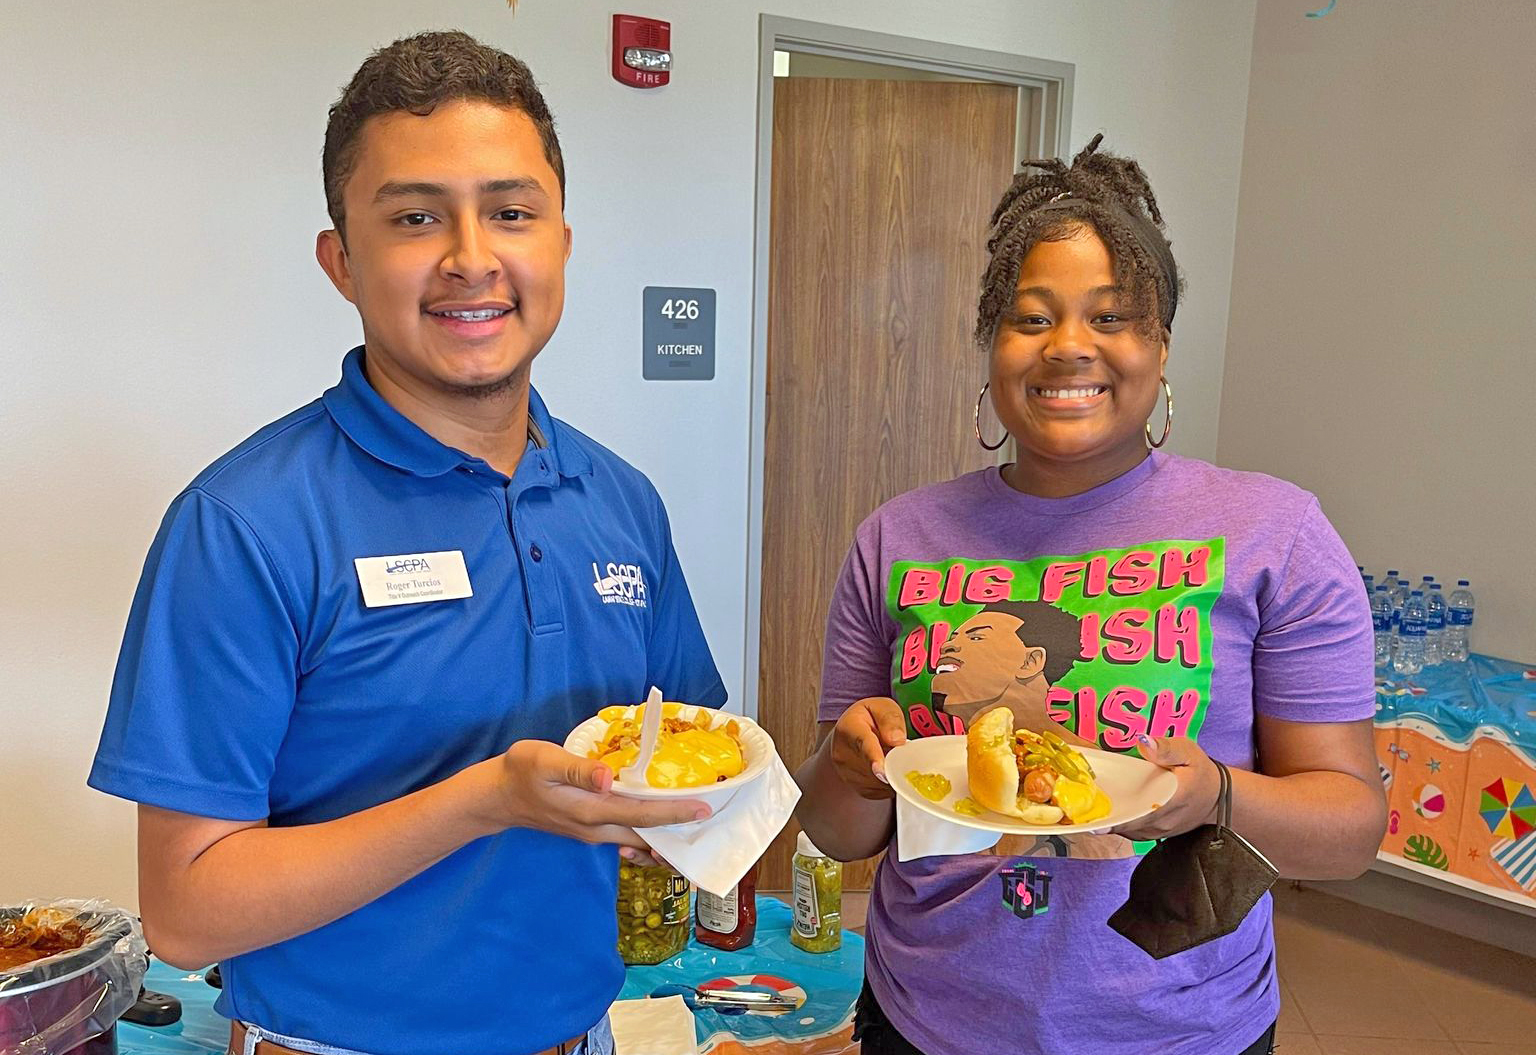 Roger Turcios Jr., pictured here during one a 2022 campus event, works as an Outreach Coordinator for Lamar State College Port Arthur